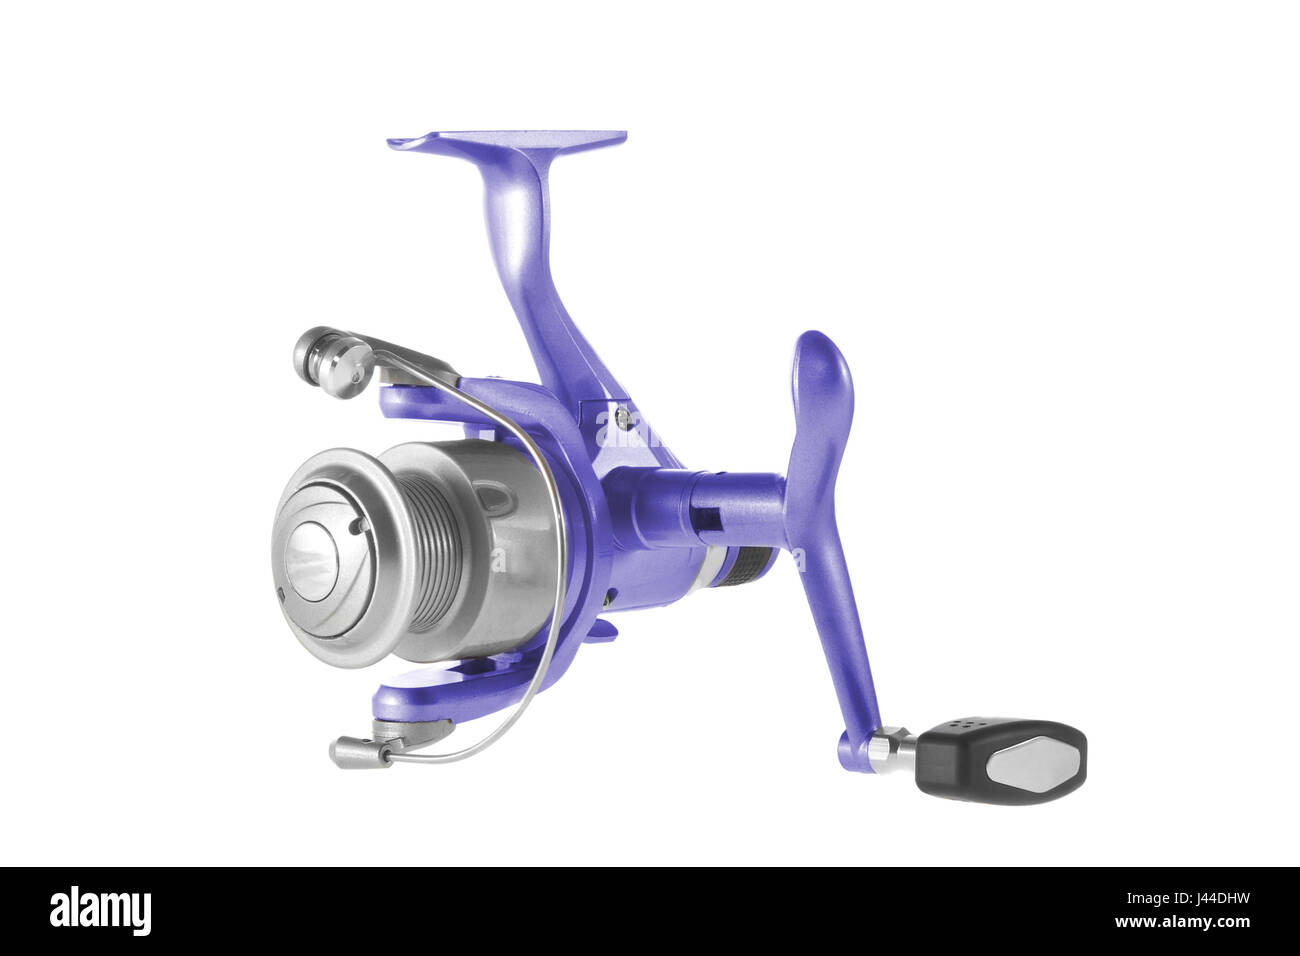 Fishing reels Cut Out Stock Images & Pictures - Alamy